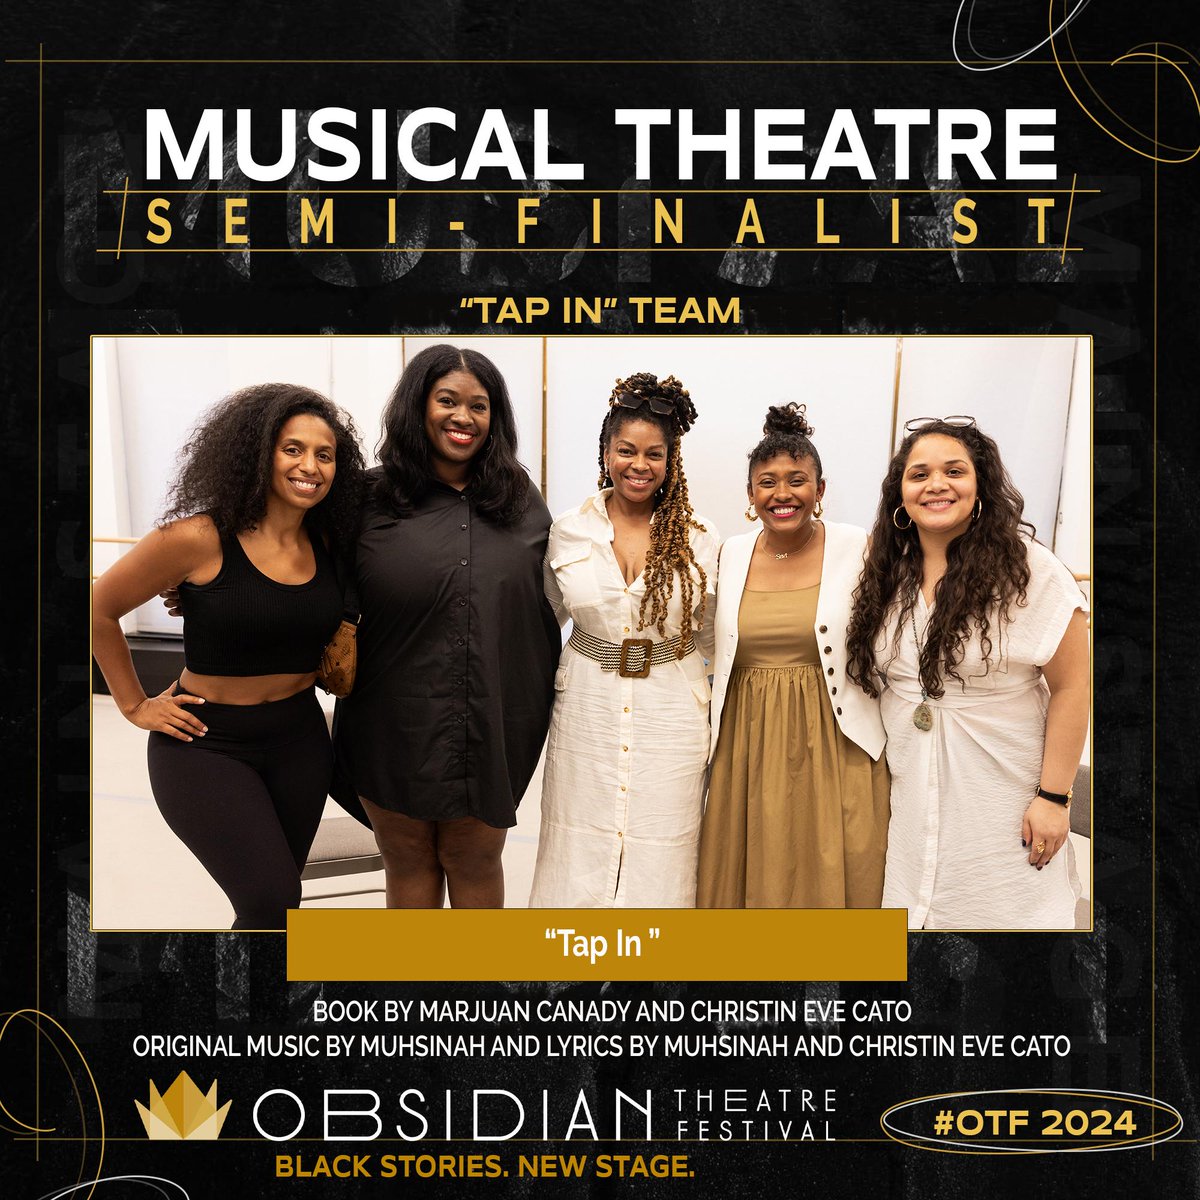 🙌🏾 Alright... here we go for Day 2! 👉🏾 The 1st of our Musical Theatre Showcase semi-finalists is the team from 'Tap In' written by Marjuan Canady and Christin Eve Cato, With Original Music by Muhsinah and Lyrics by Muhsinah and Christin Eve Cato.
 #otf2024 #obsidianfest